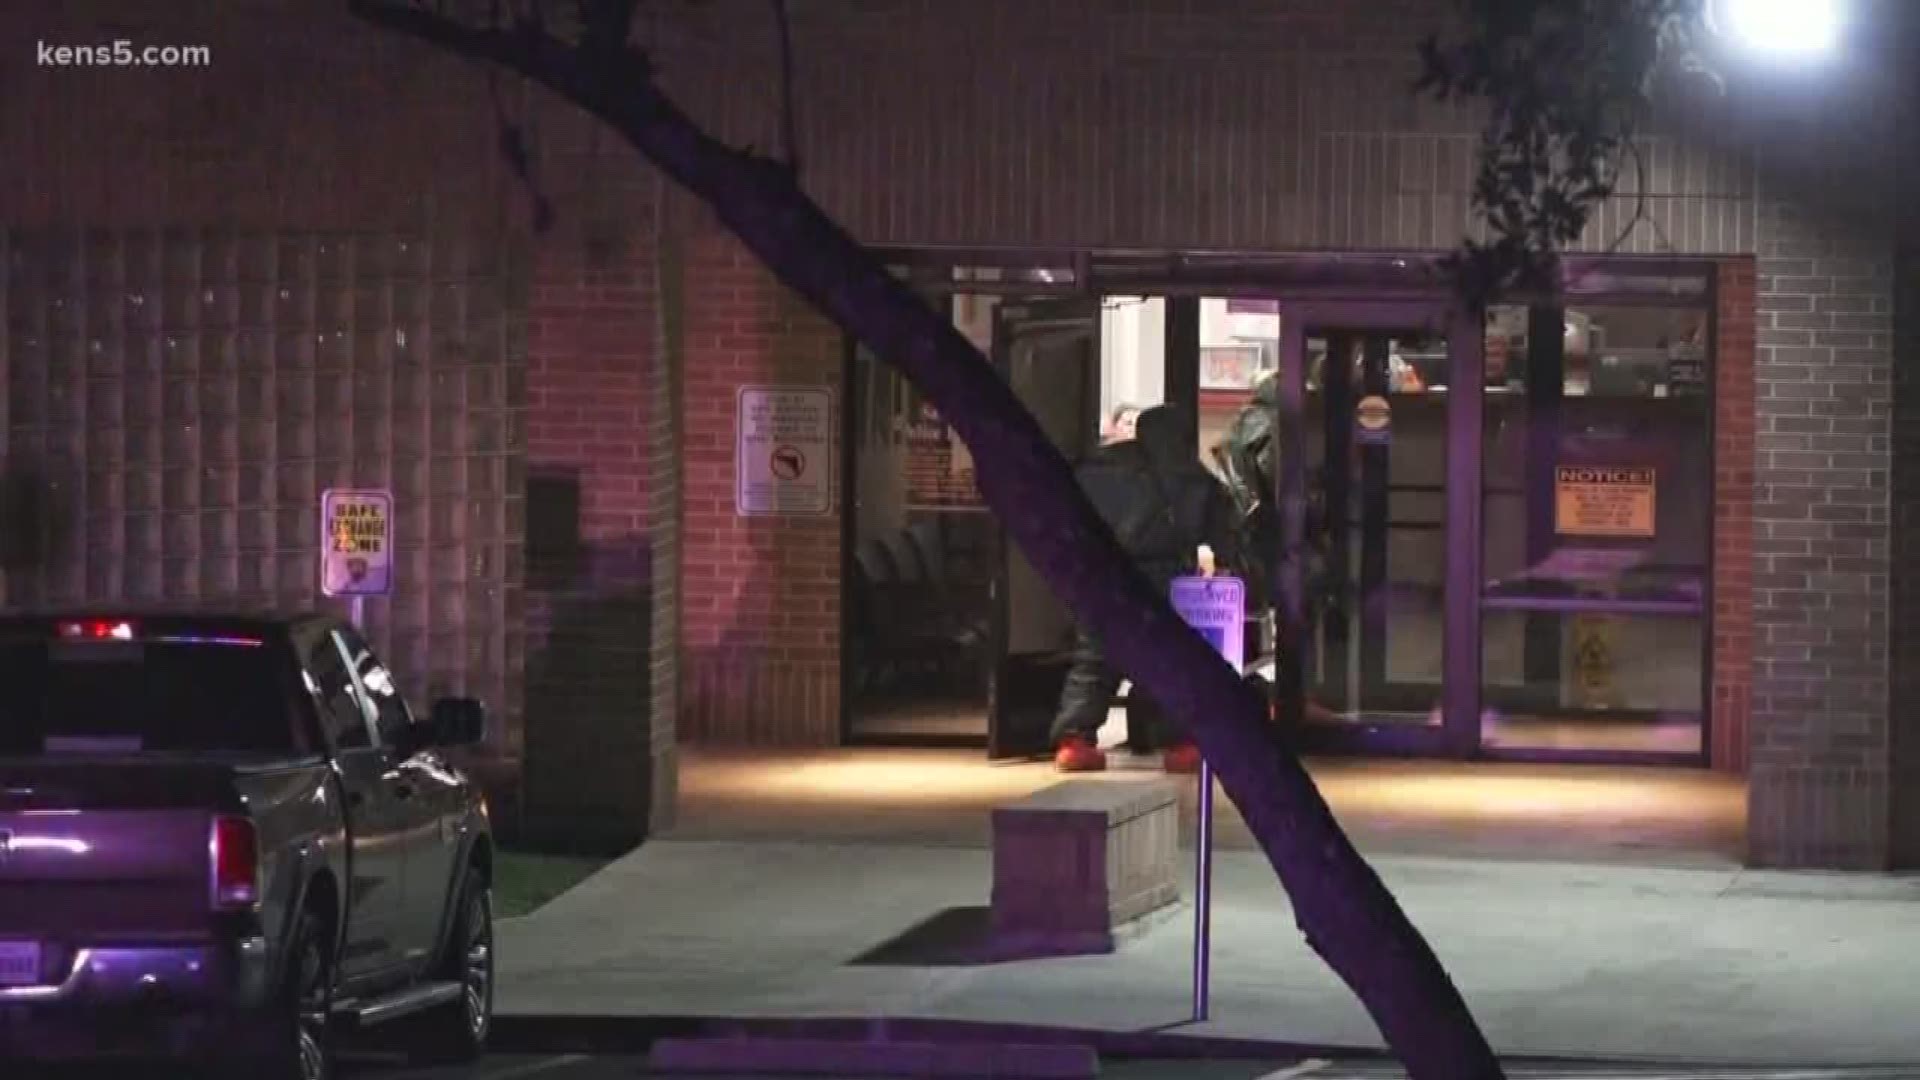 A suspicious envelope with a white powder substance was taken to a San Antonio substation on the city's North East side. The block was shut down for hours as teams investigated.